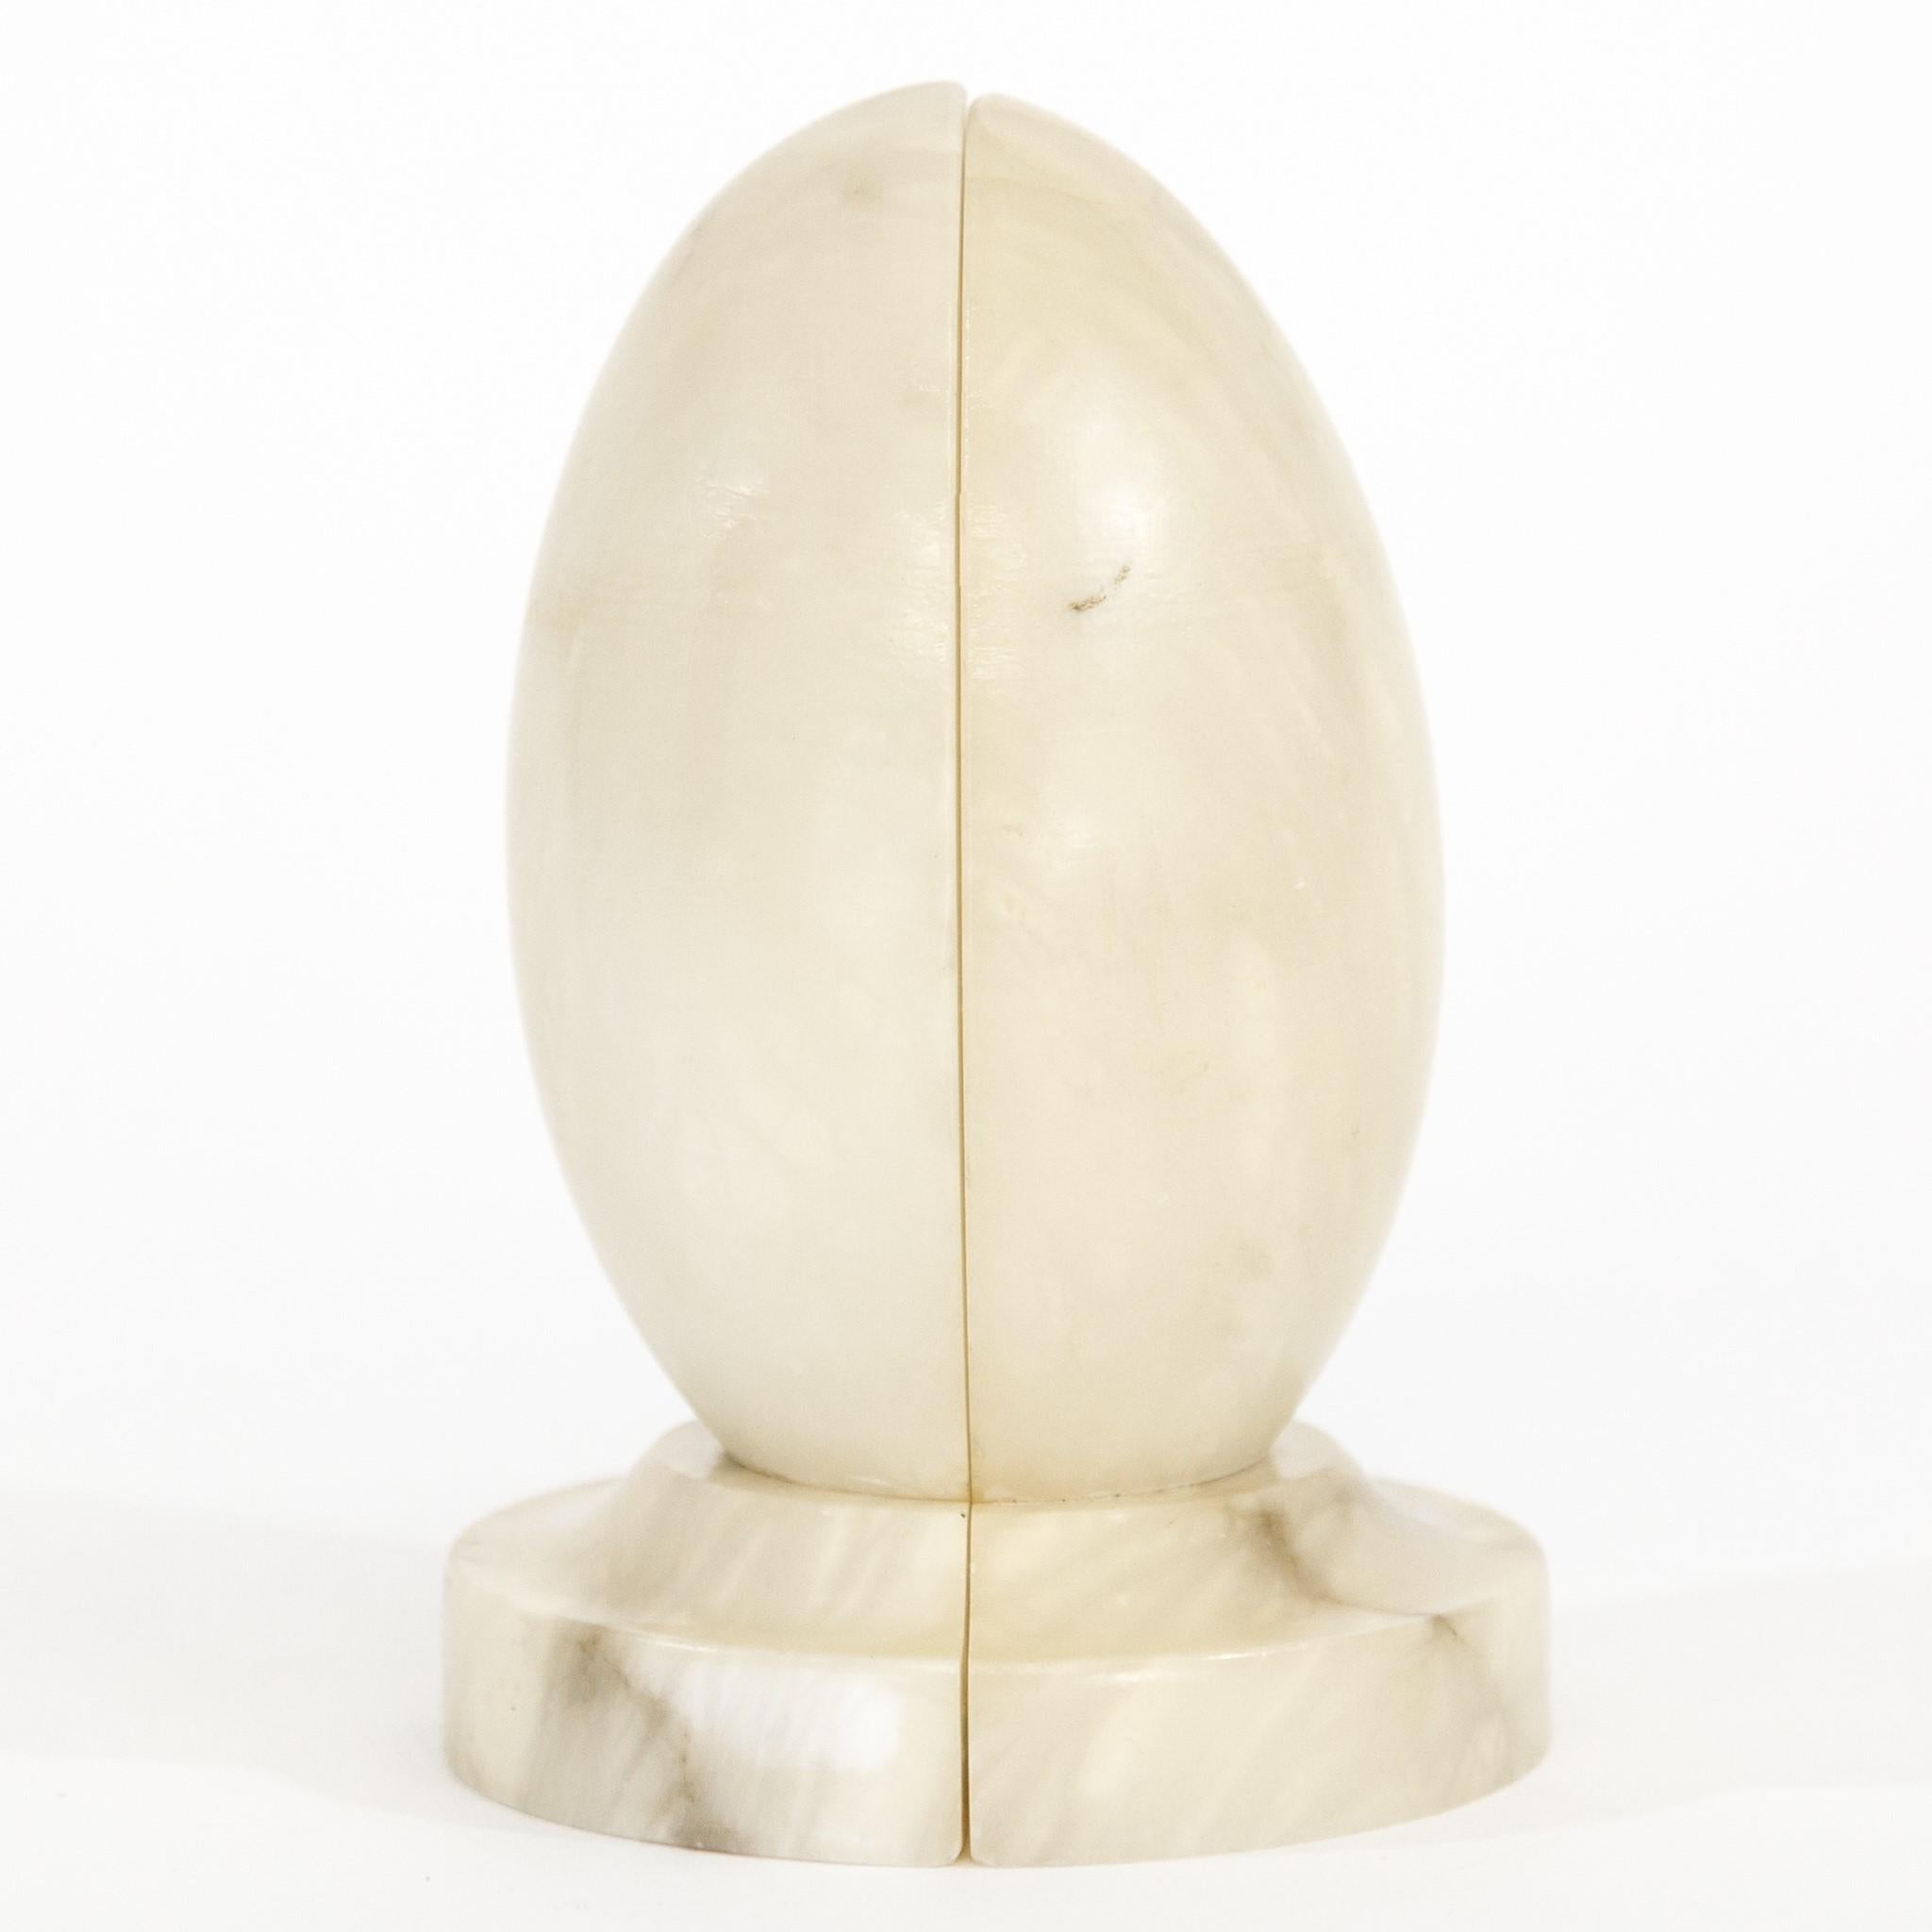 Pair of Mid-Century Italian Alabaster Off-White Egg-Shape Bookends 1